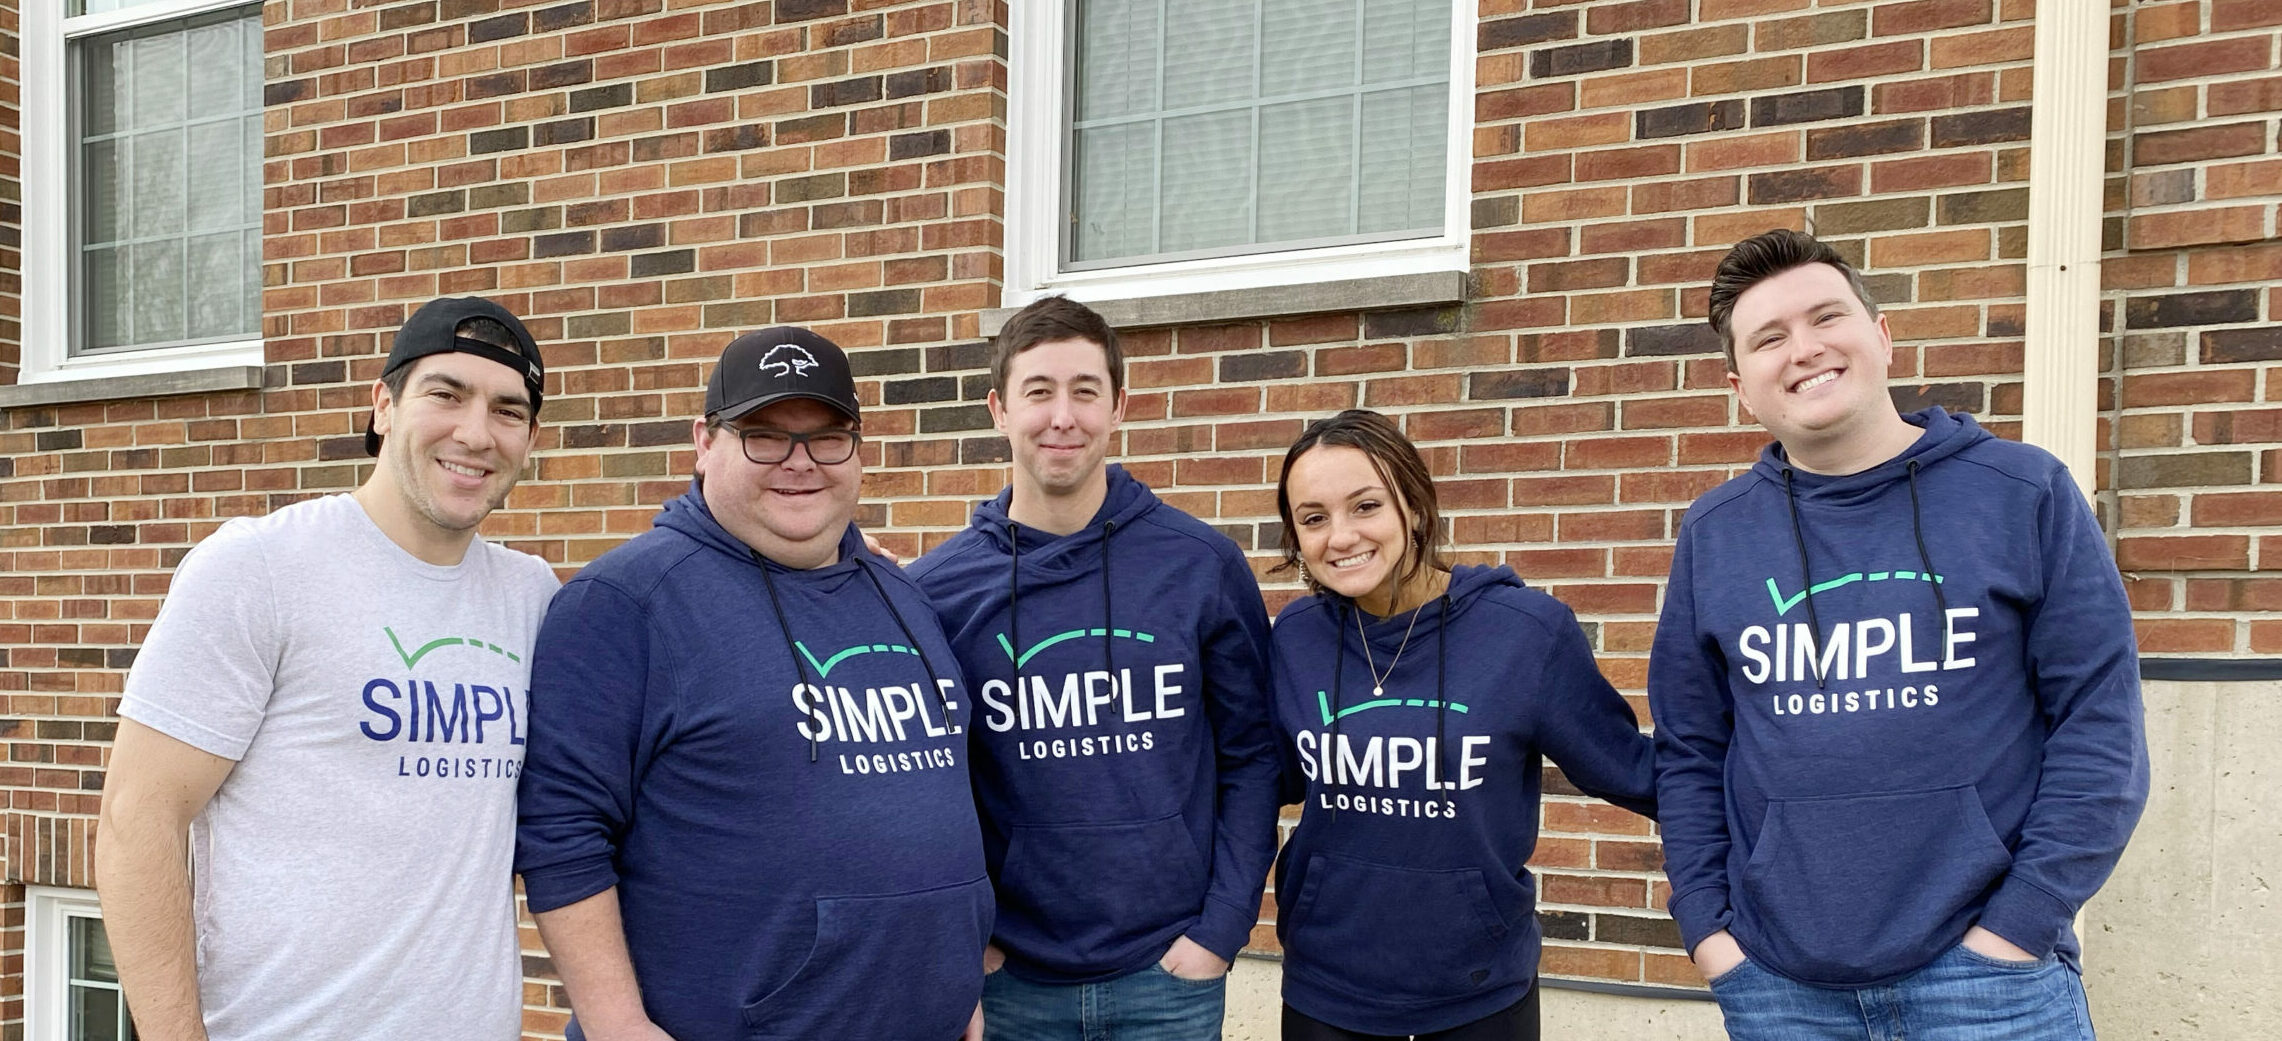 5 Members of the Simple Logistics Team standing together in front of a brick building, smiling at the camera